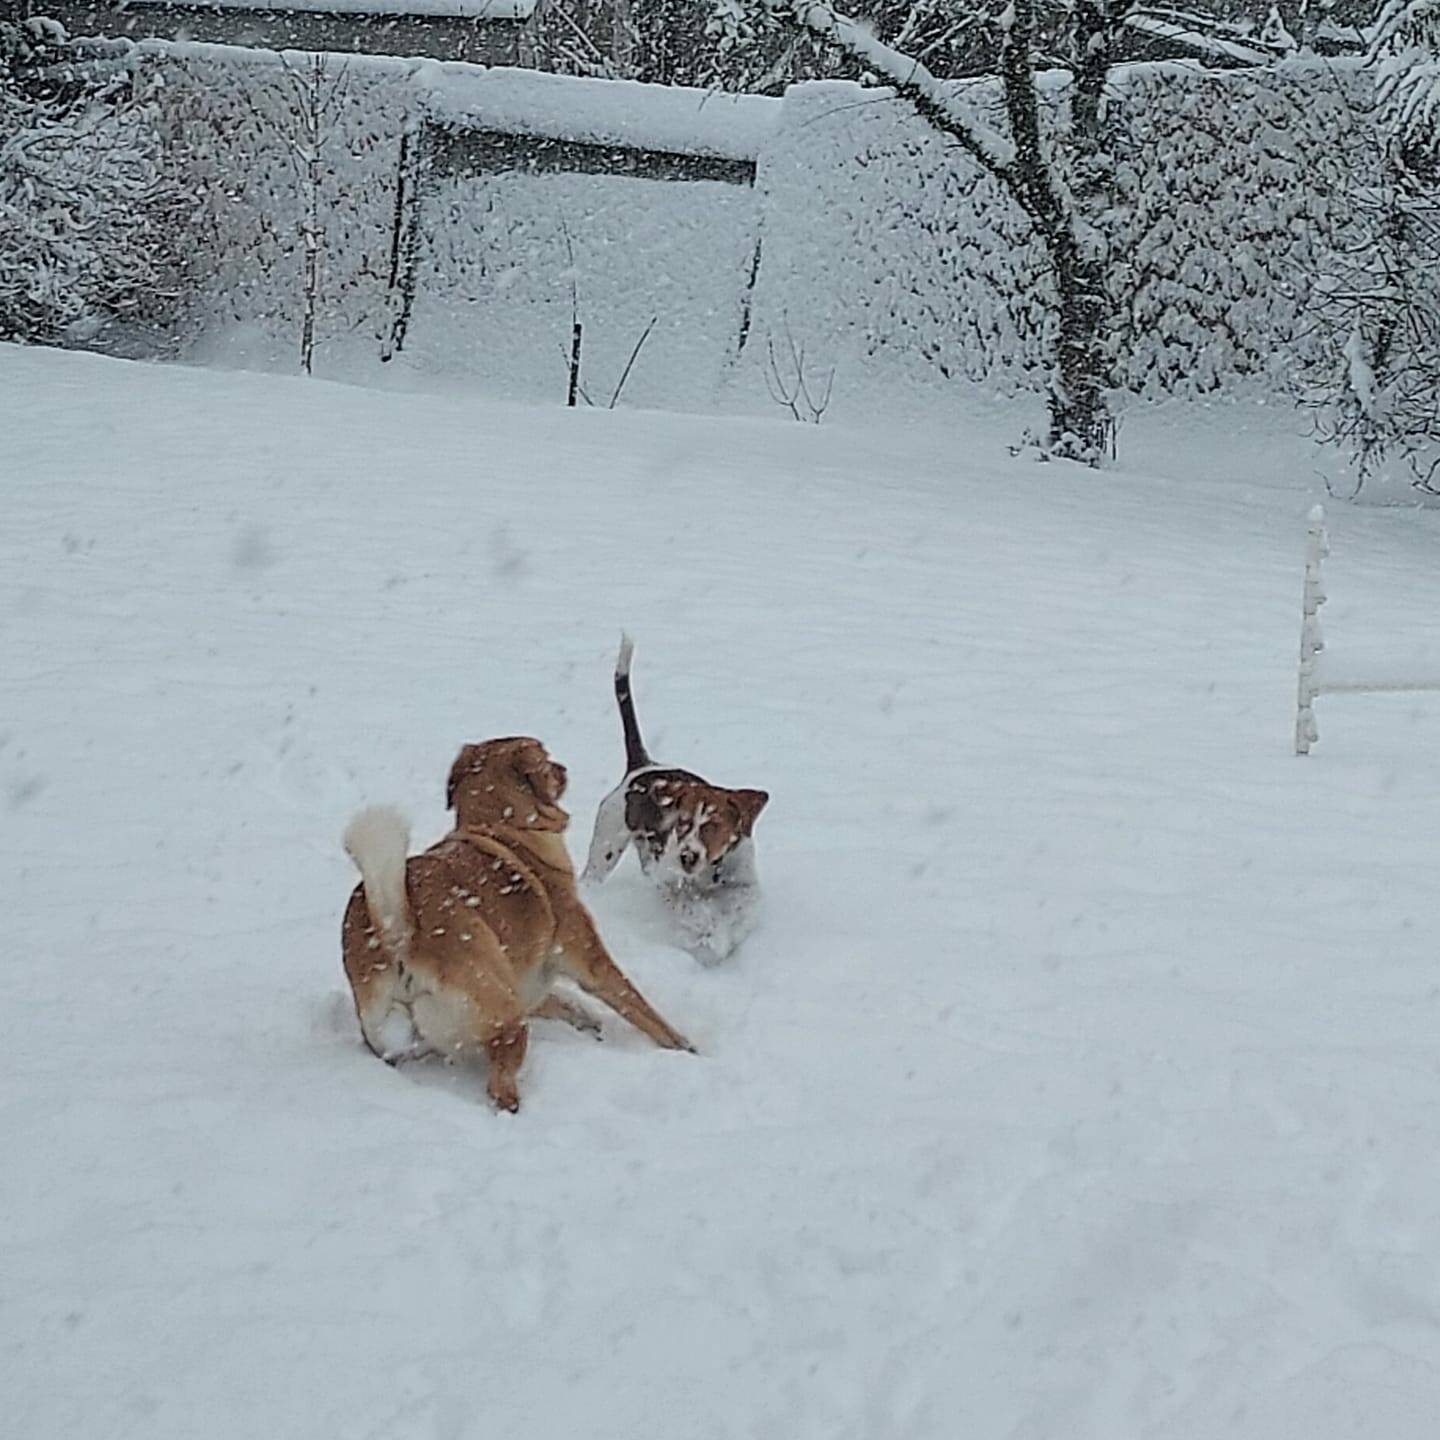 Some enjoy the snow more than others! Photo submitted to Auburn Reporter by Sandi Price Parsons